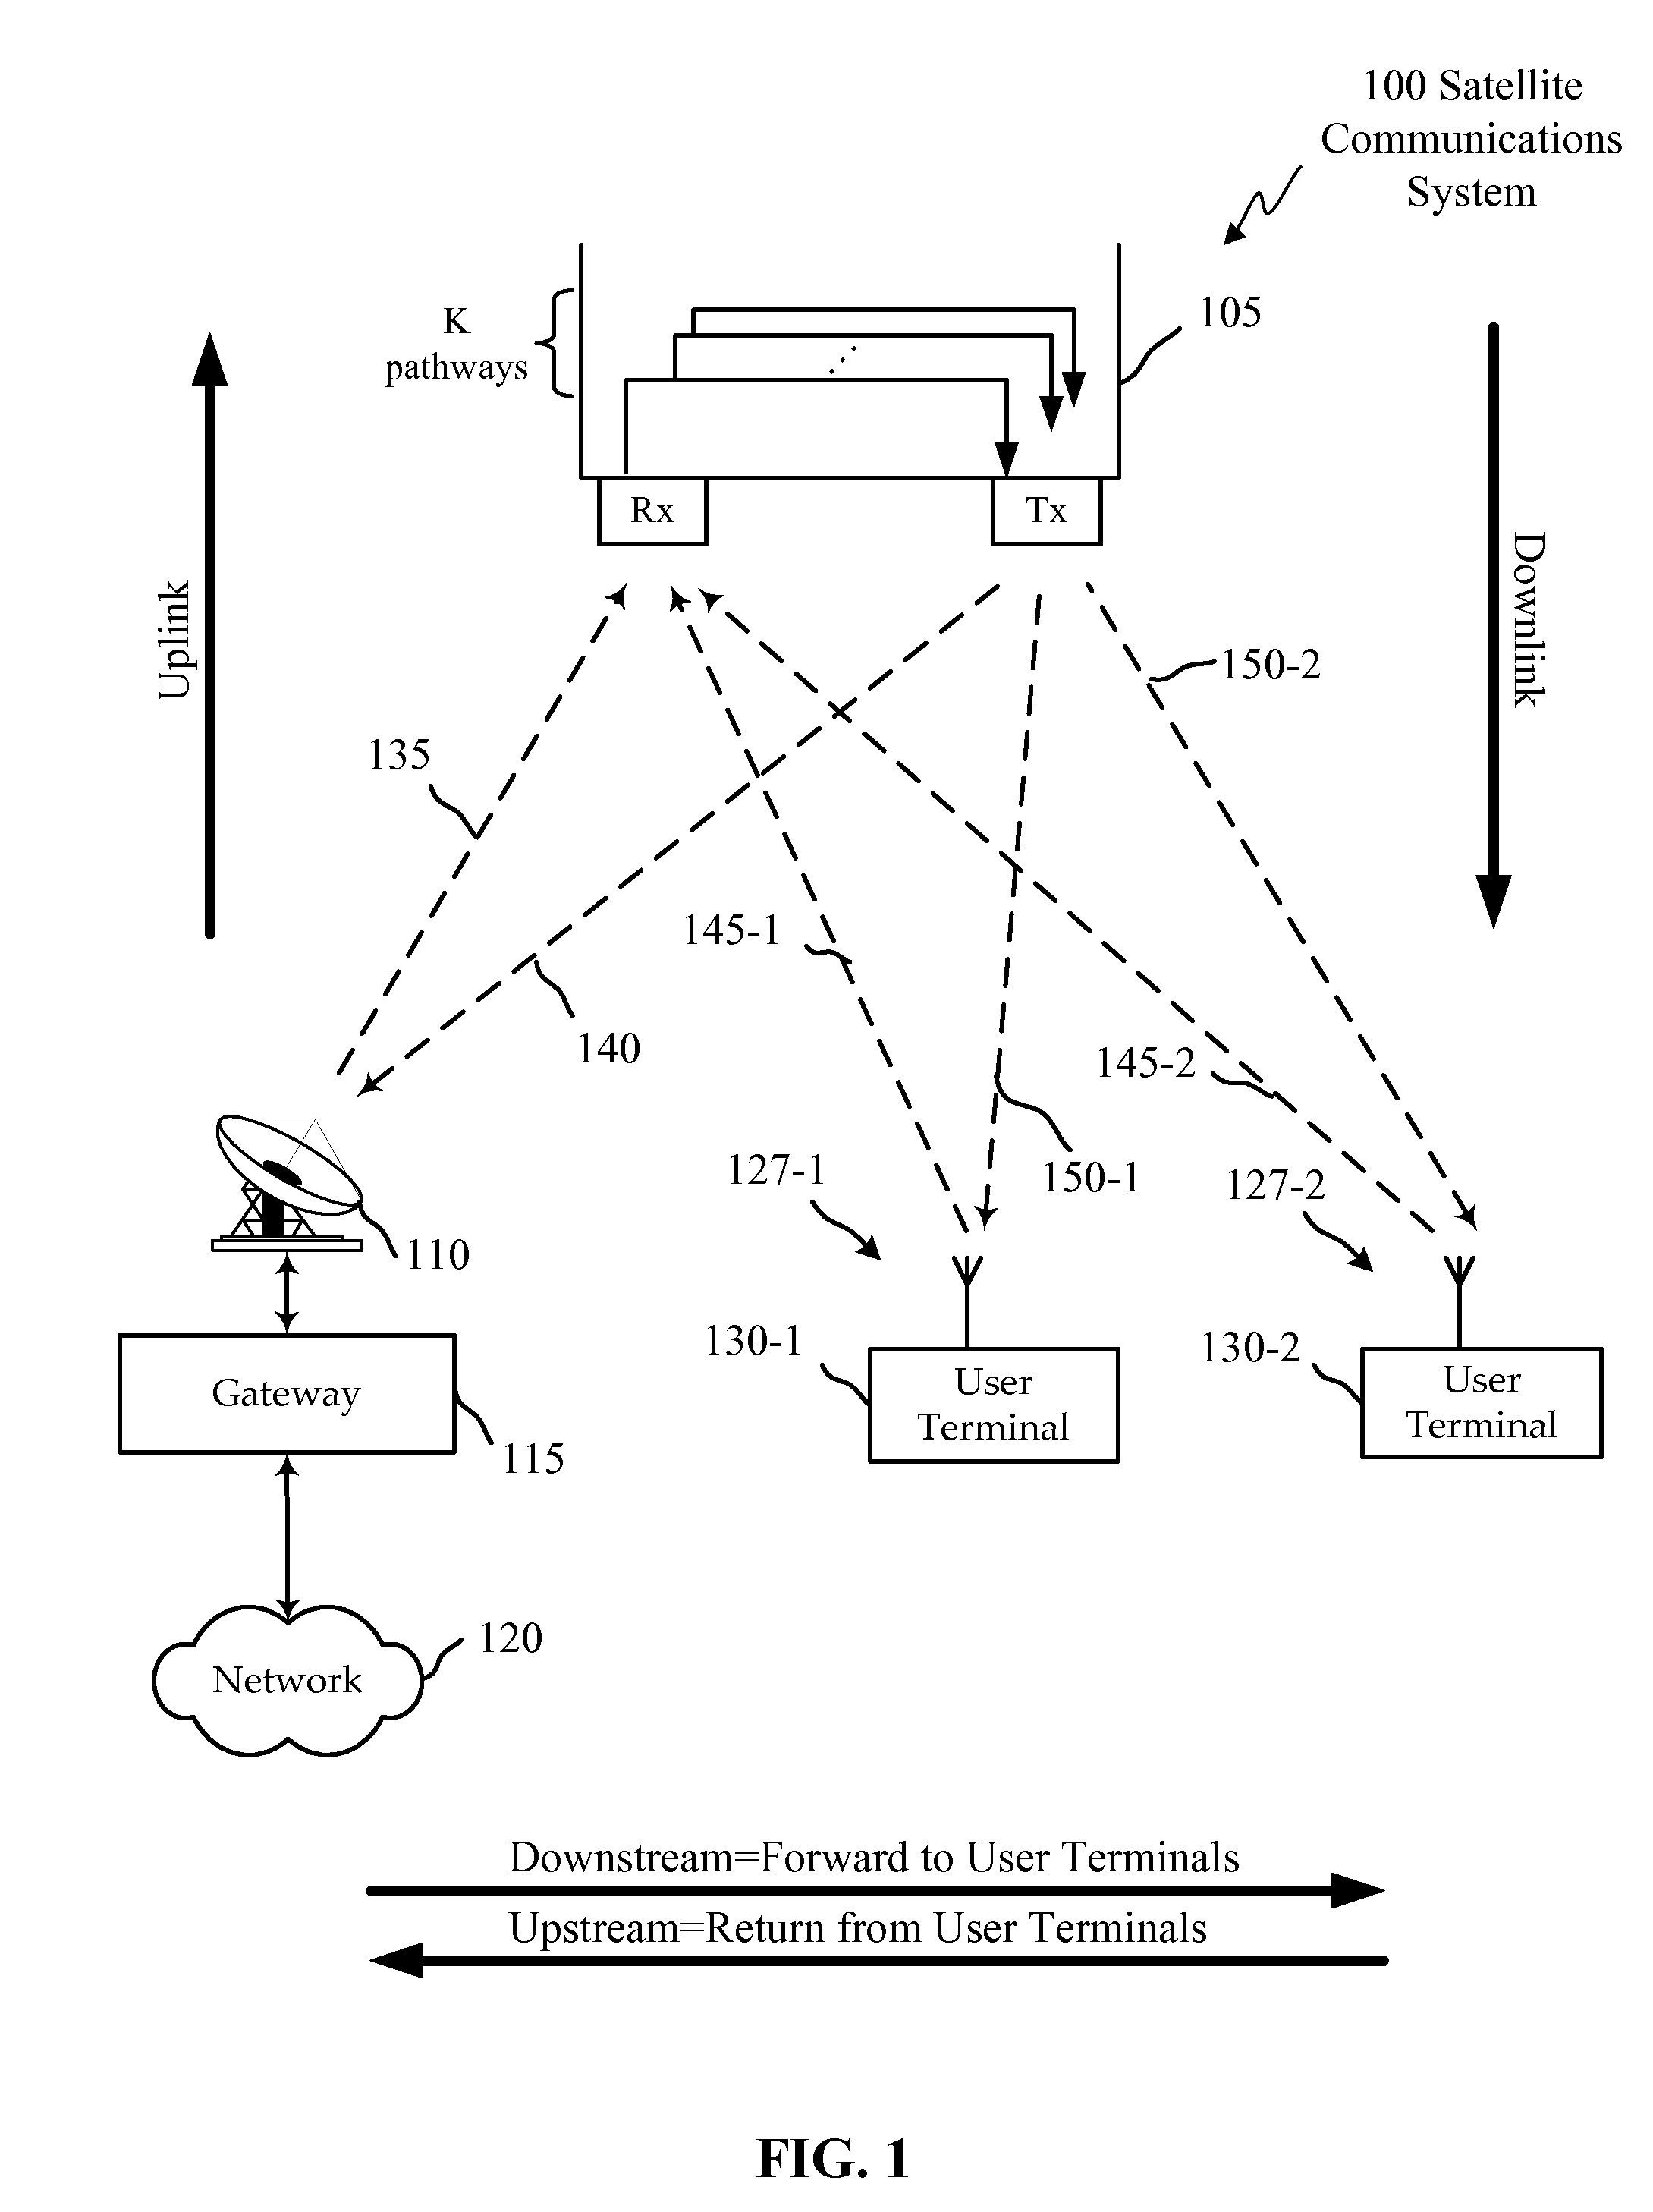 Flexible capacity satellite communications system with flexible allocation between forward and return capacity